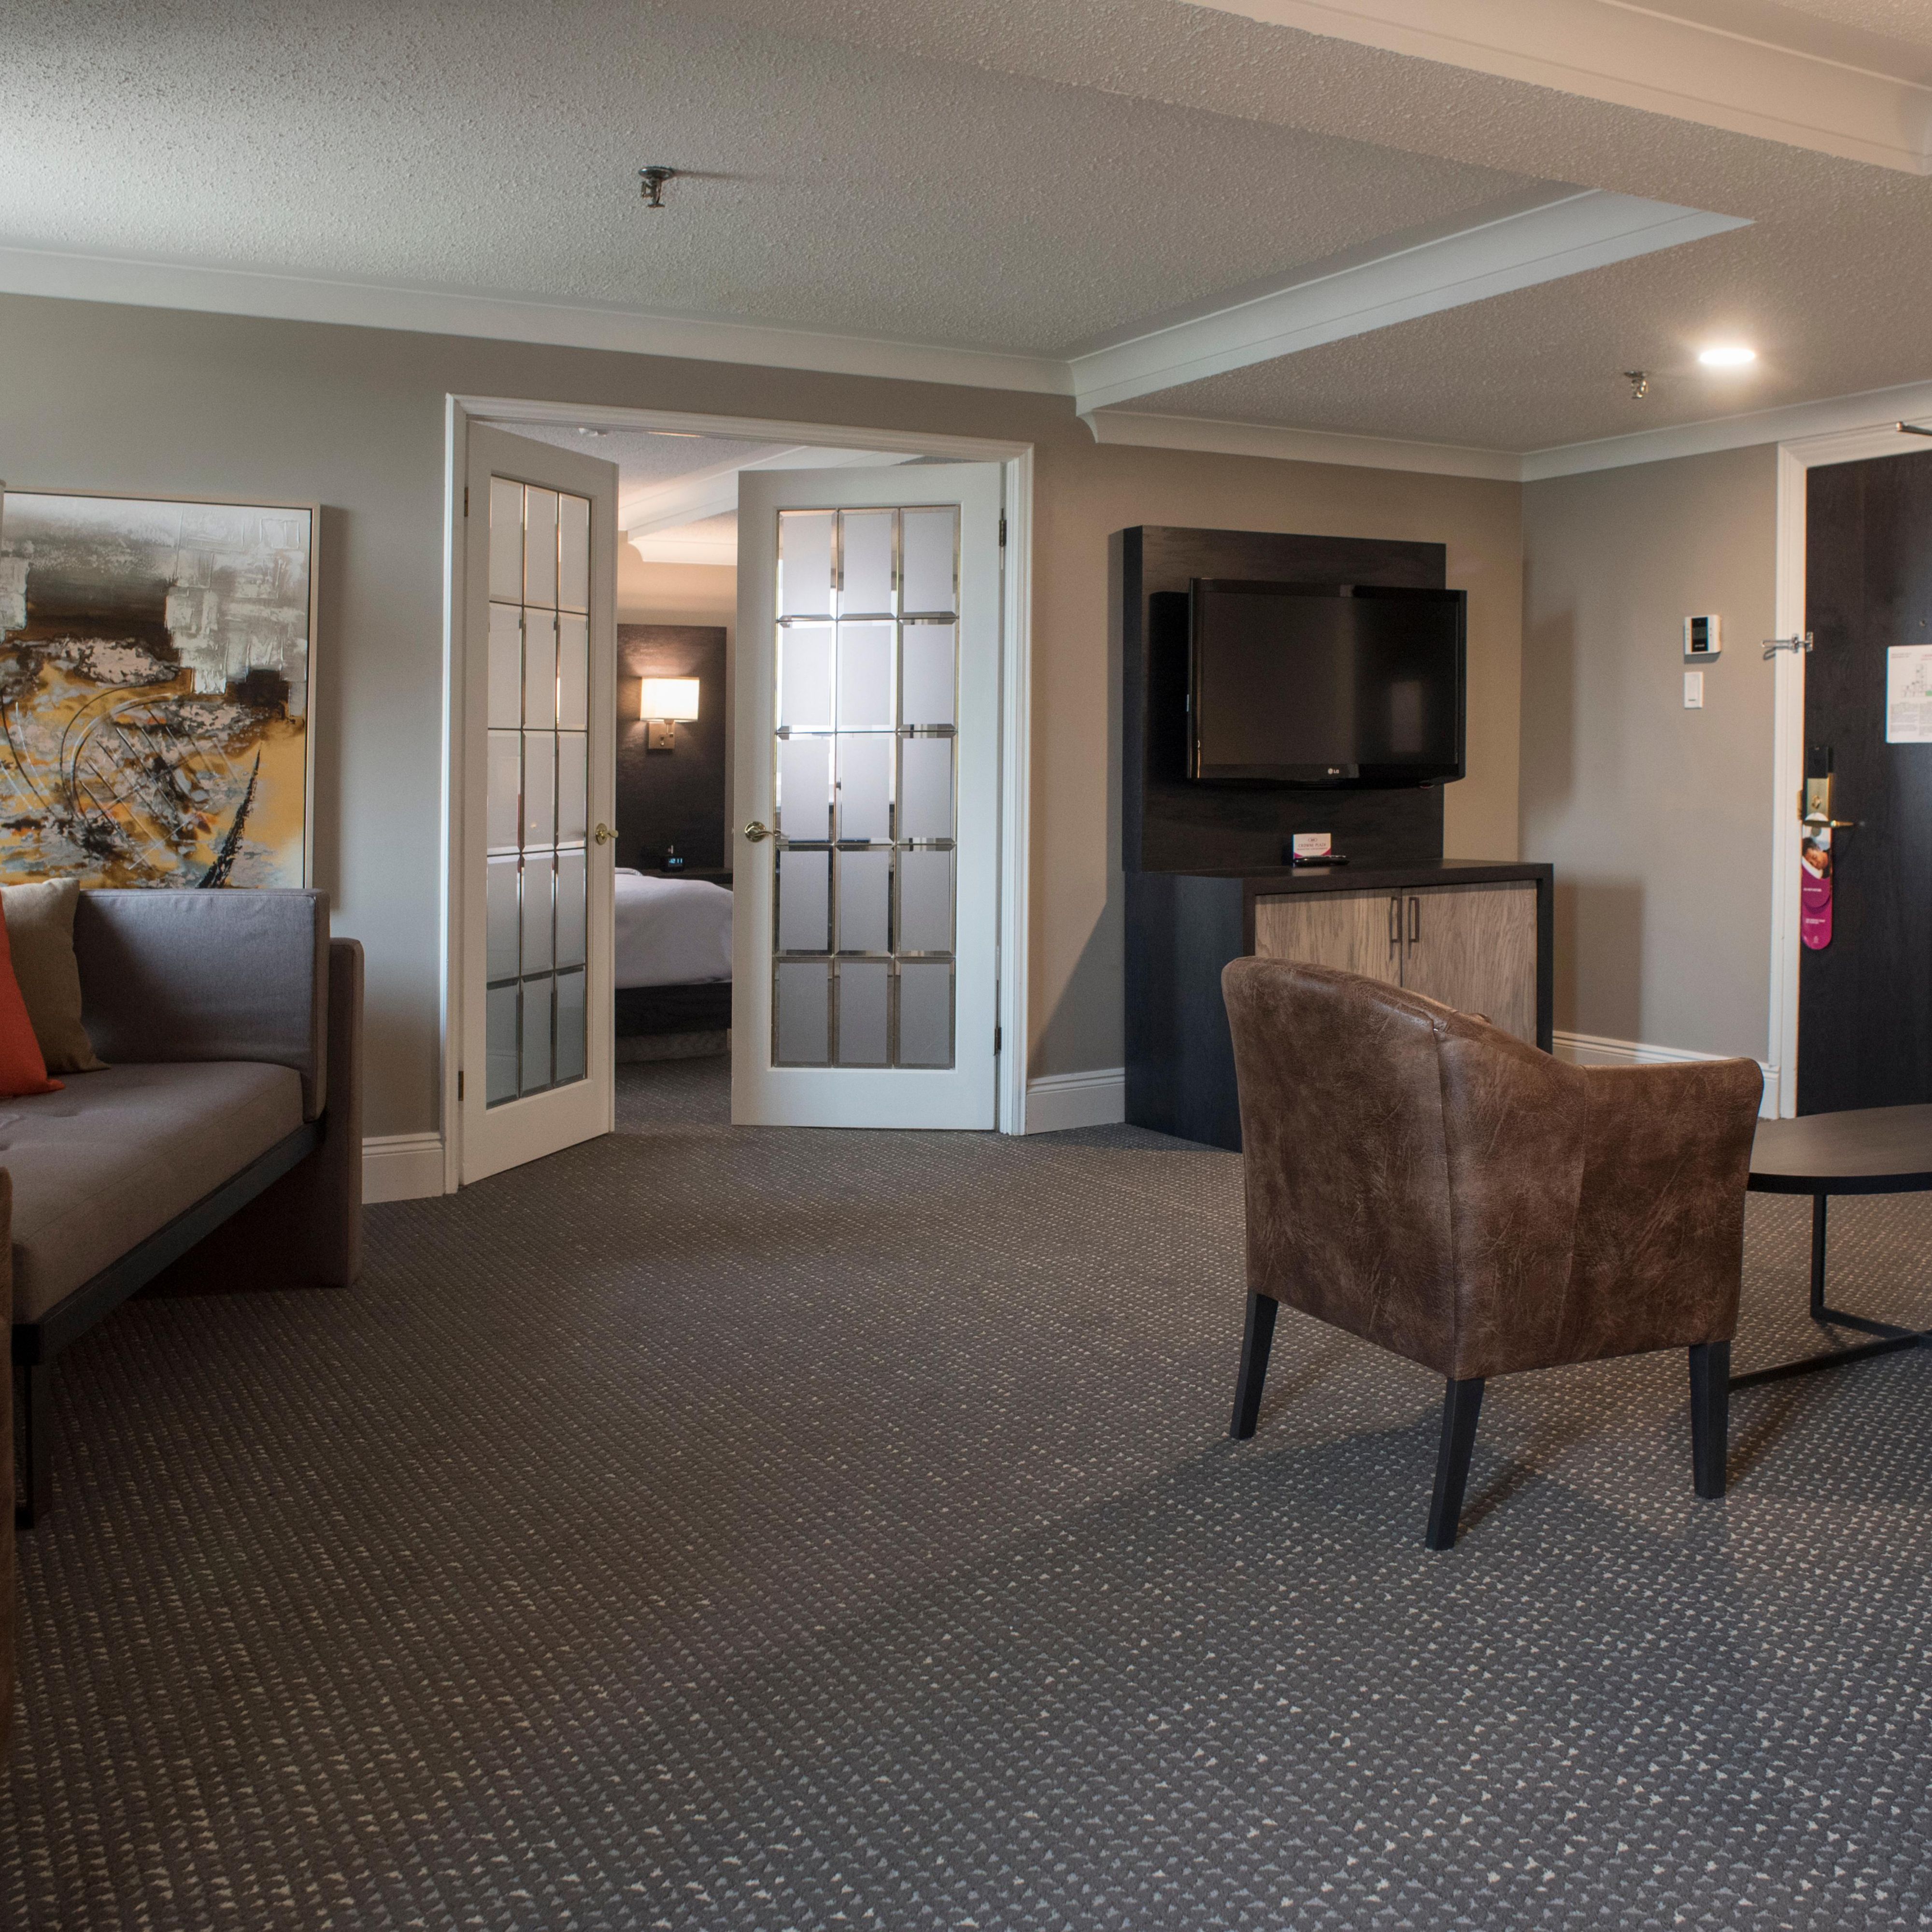 If you’re looking for extra space book our Lord Beaverbrook Suite